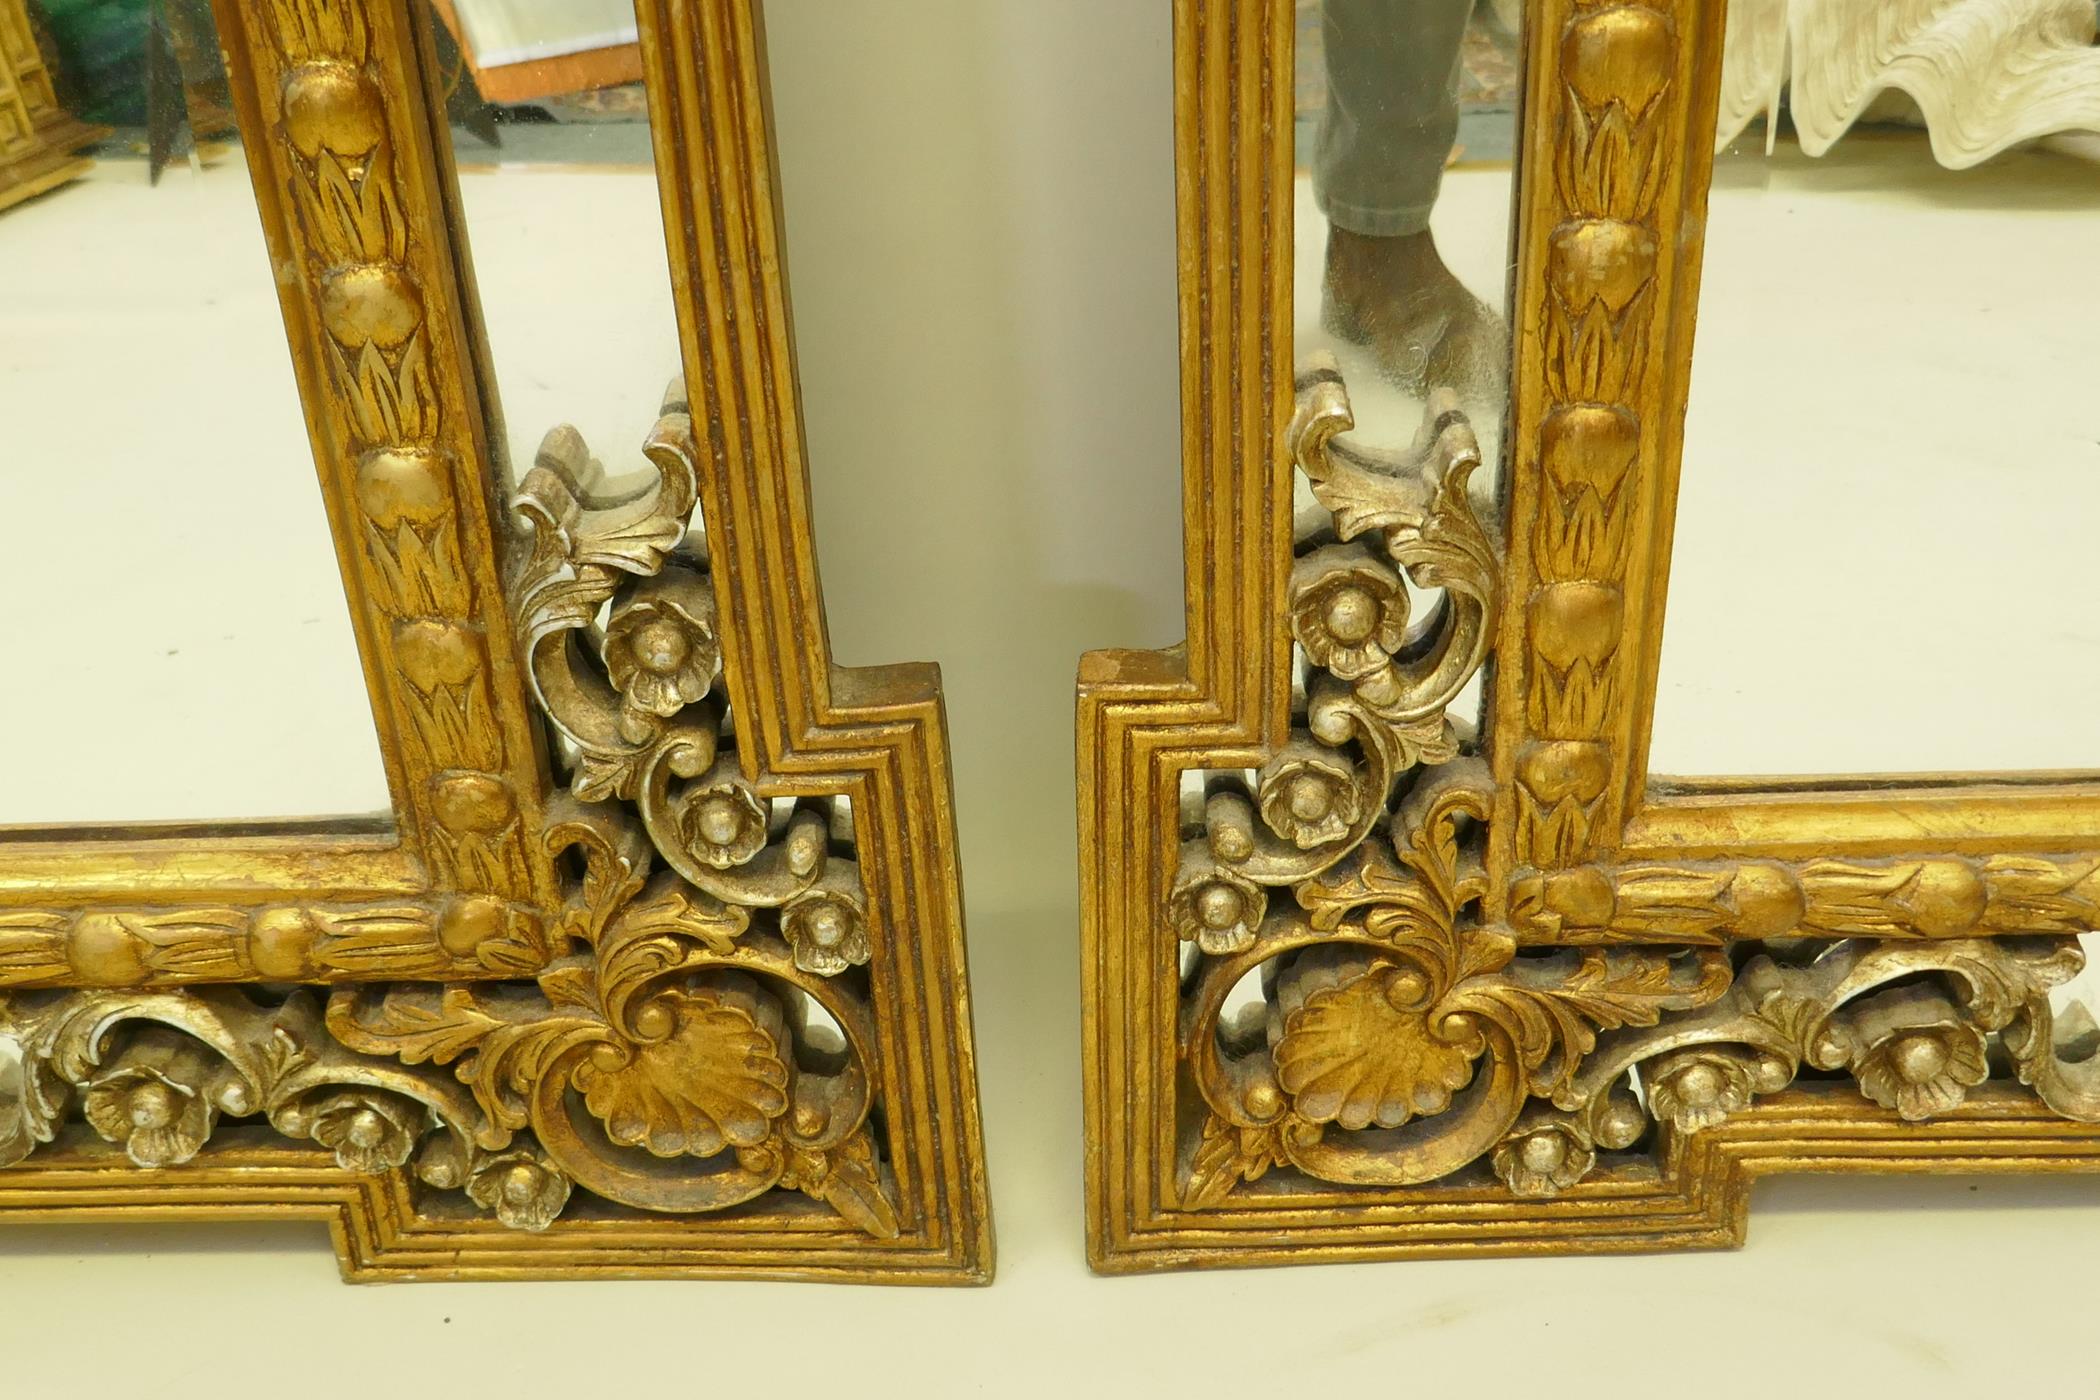 A pair of Rococo style gilt composition wall mirrors with moulded floral detail, 99 x 198cm high - Image 5 of 5